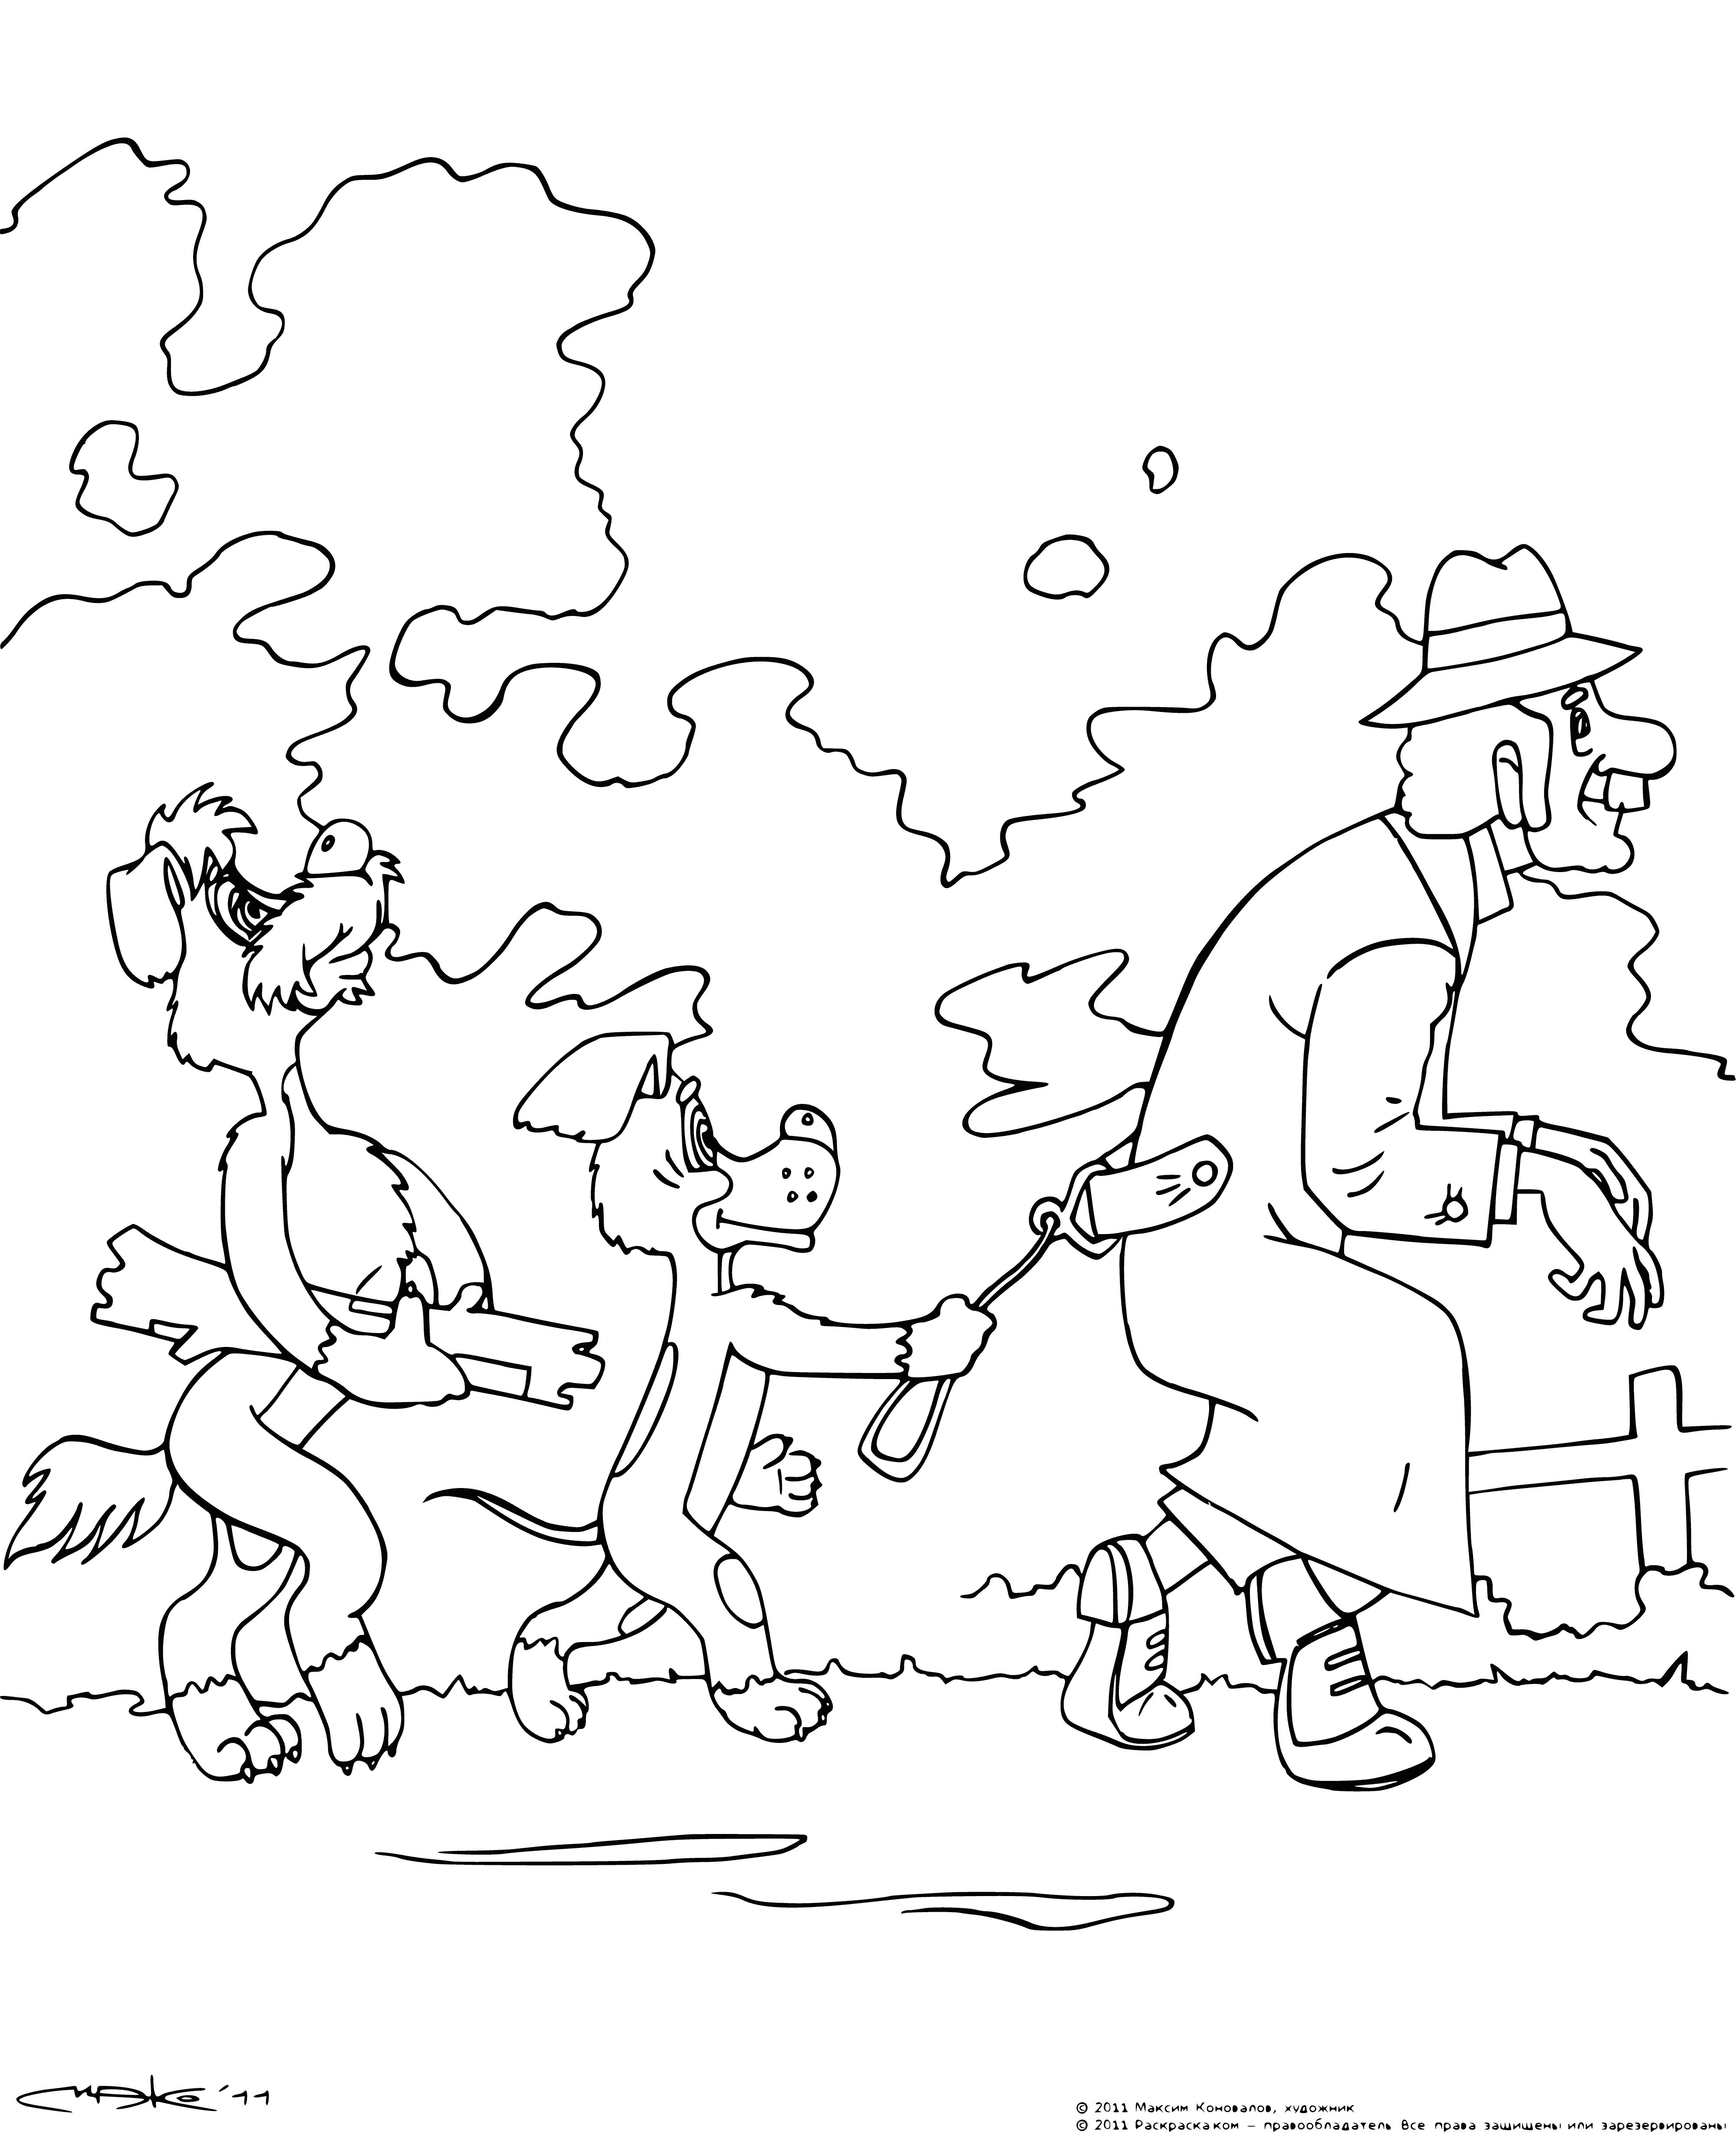 coloring page: Small dog rides on larger dog's back, both look determined to get where they're going. #dogsgonehiking